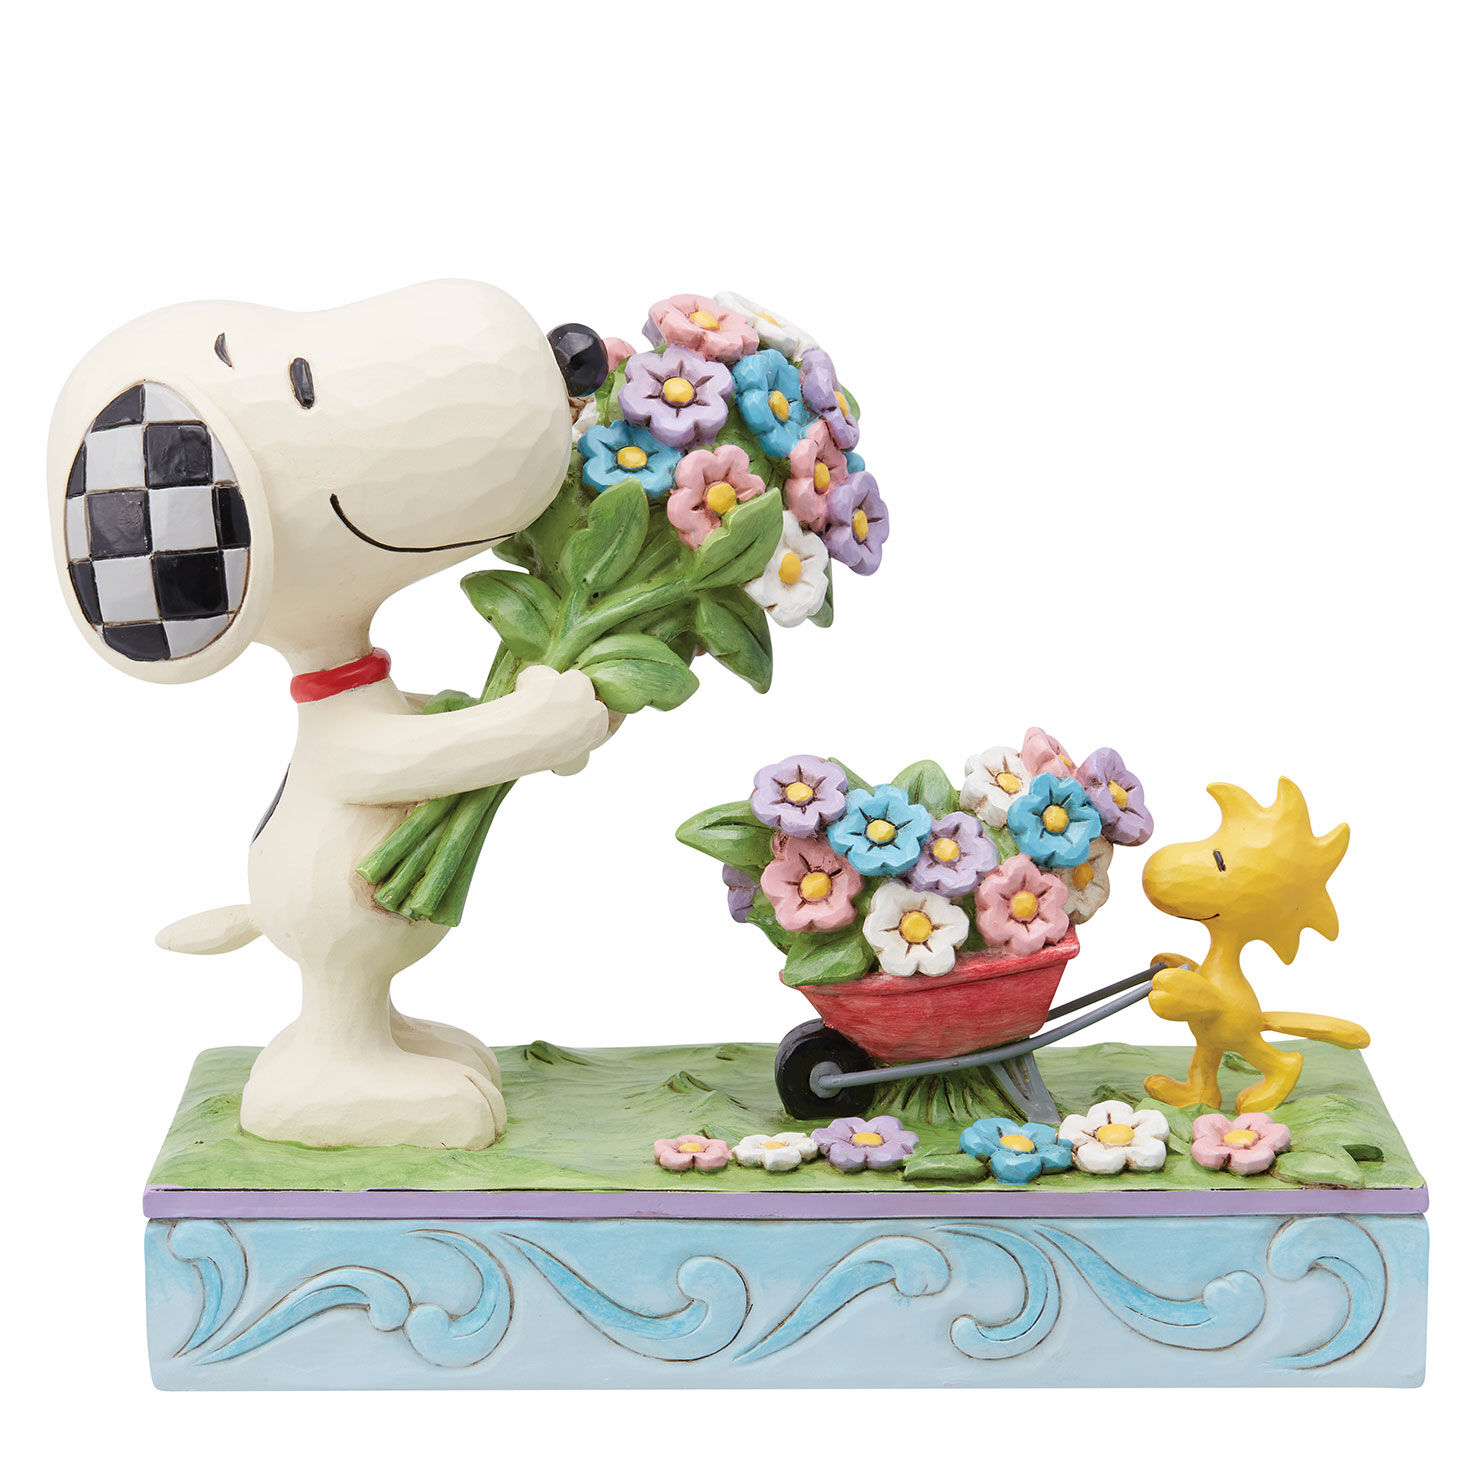 Jim Shore Peanuts Snoopy and Woodstock With Flowers Figurine, 6" for only USD 64.99 | Hallmark